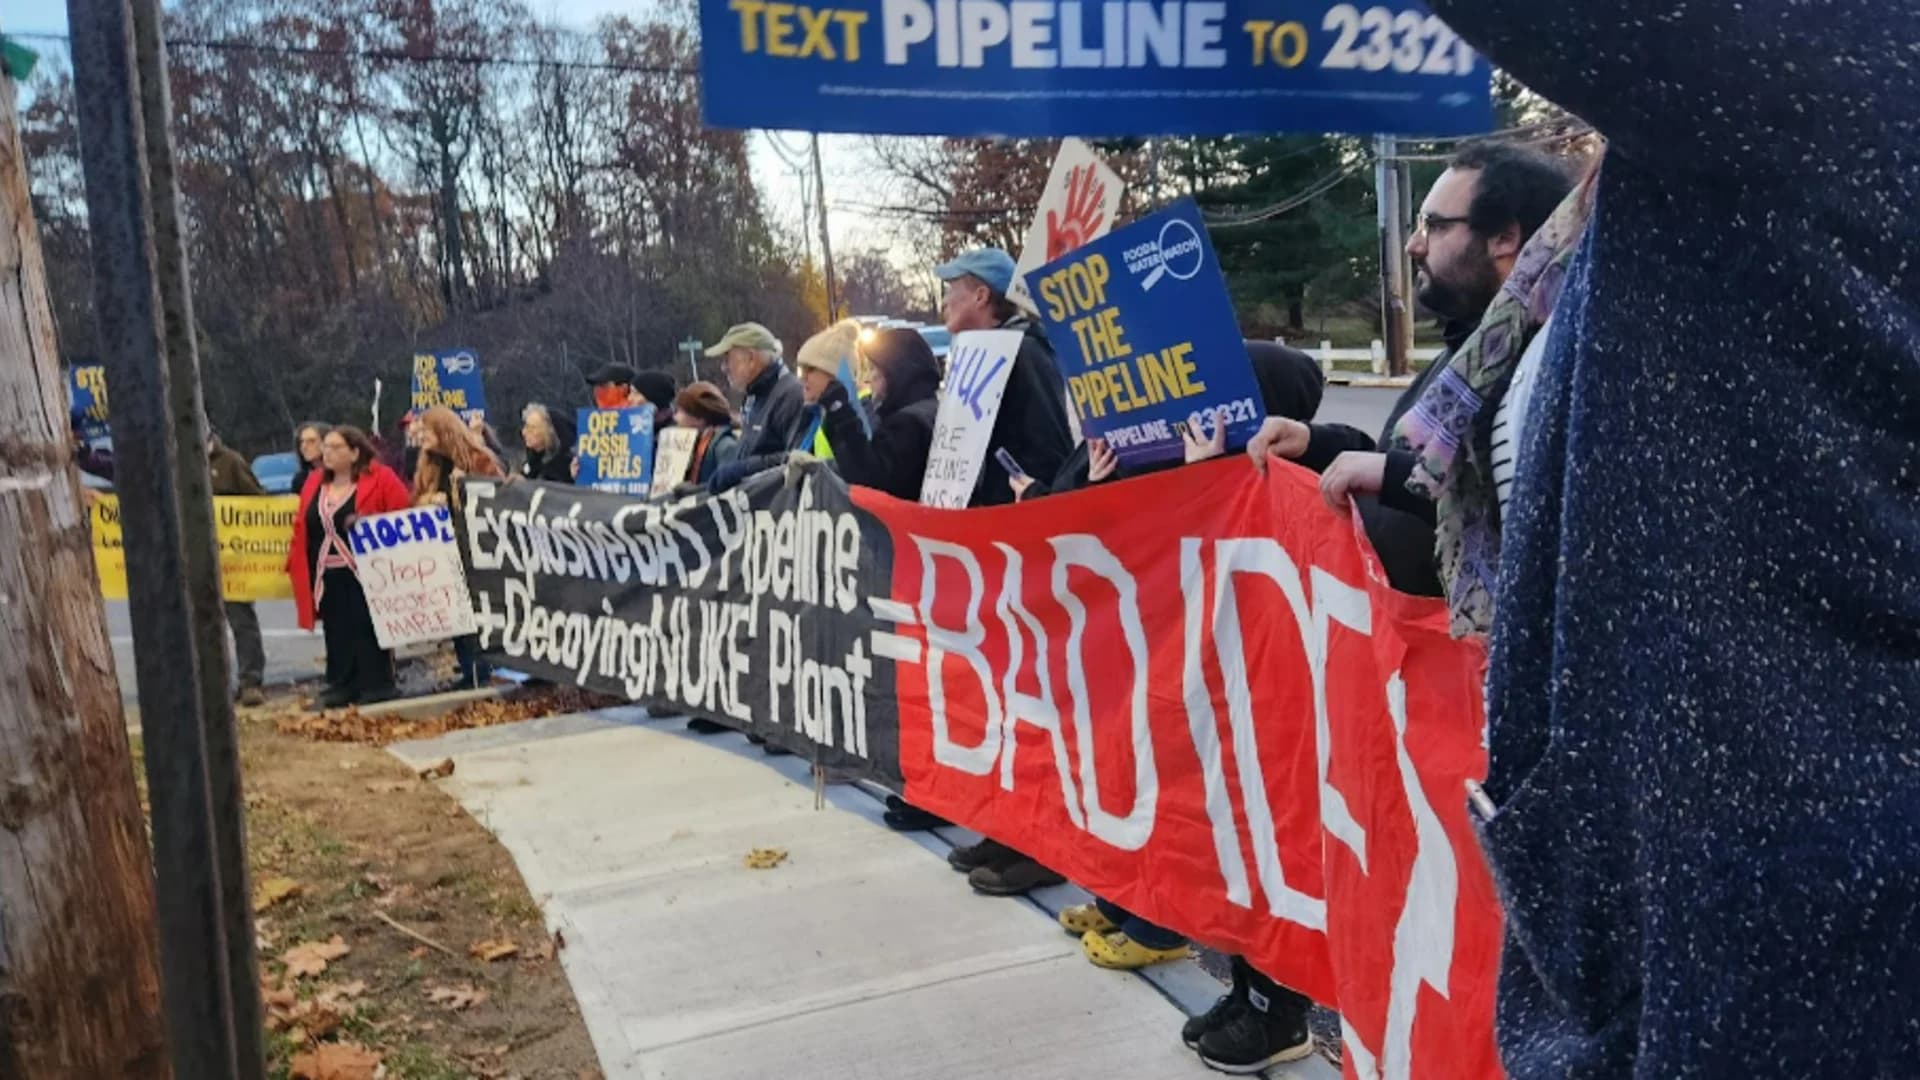 Climate activists call on Gov. Hochul to stop natural gas pipeline expansion near Indian Point